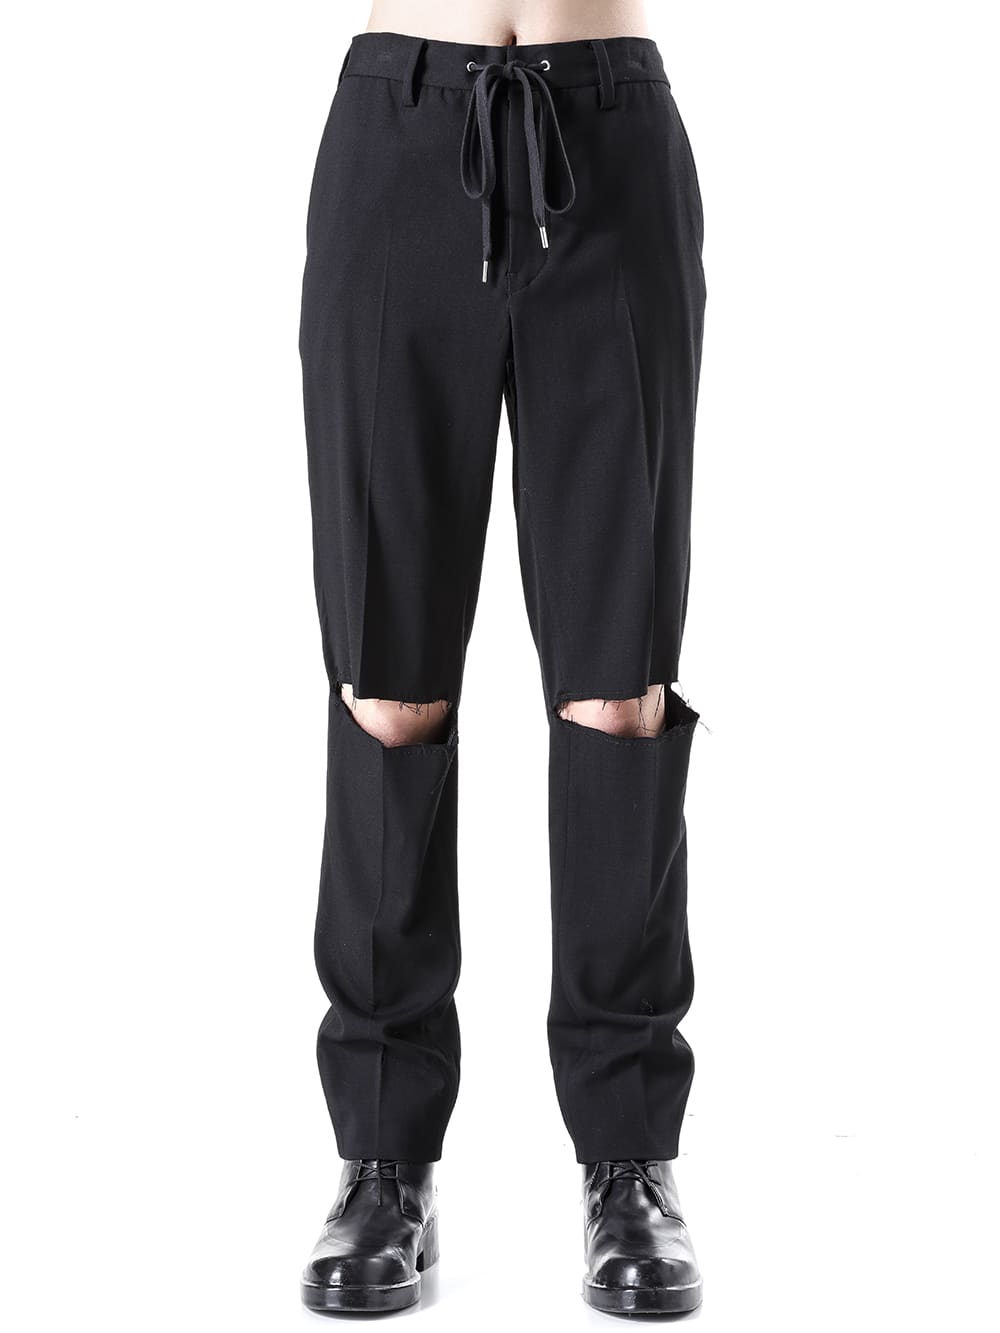 two-way plain front pant.